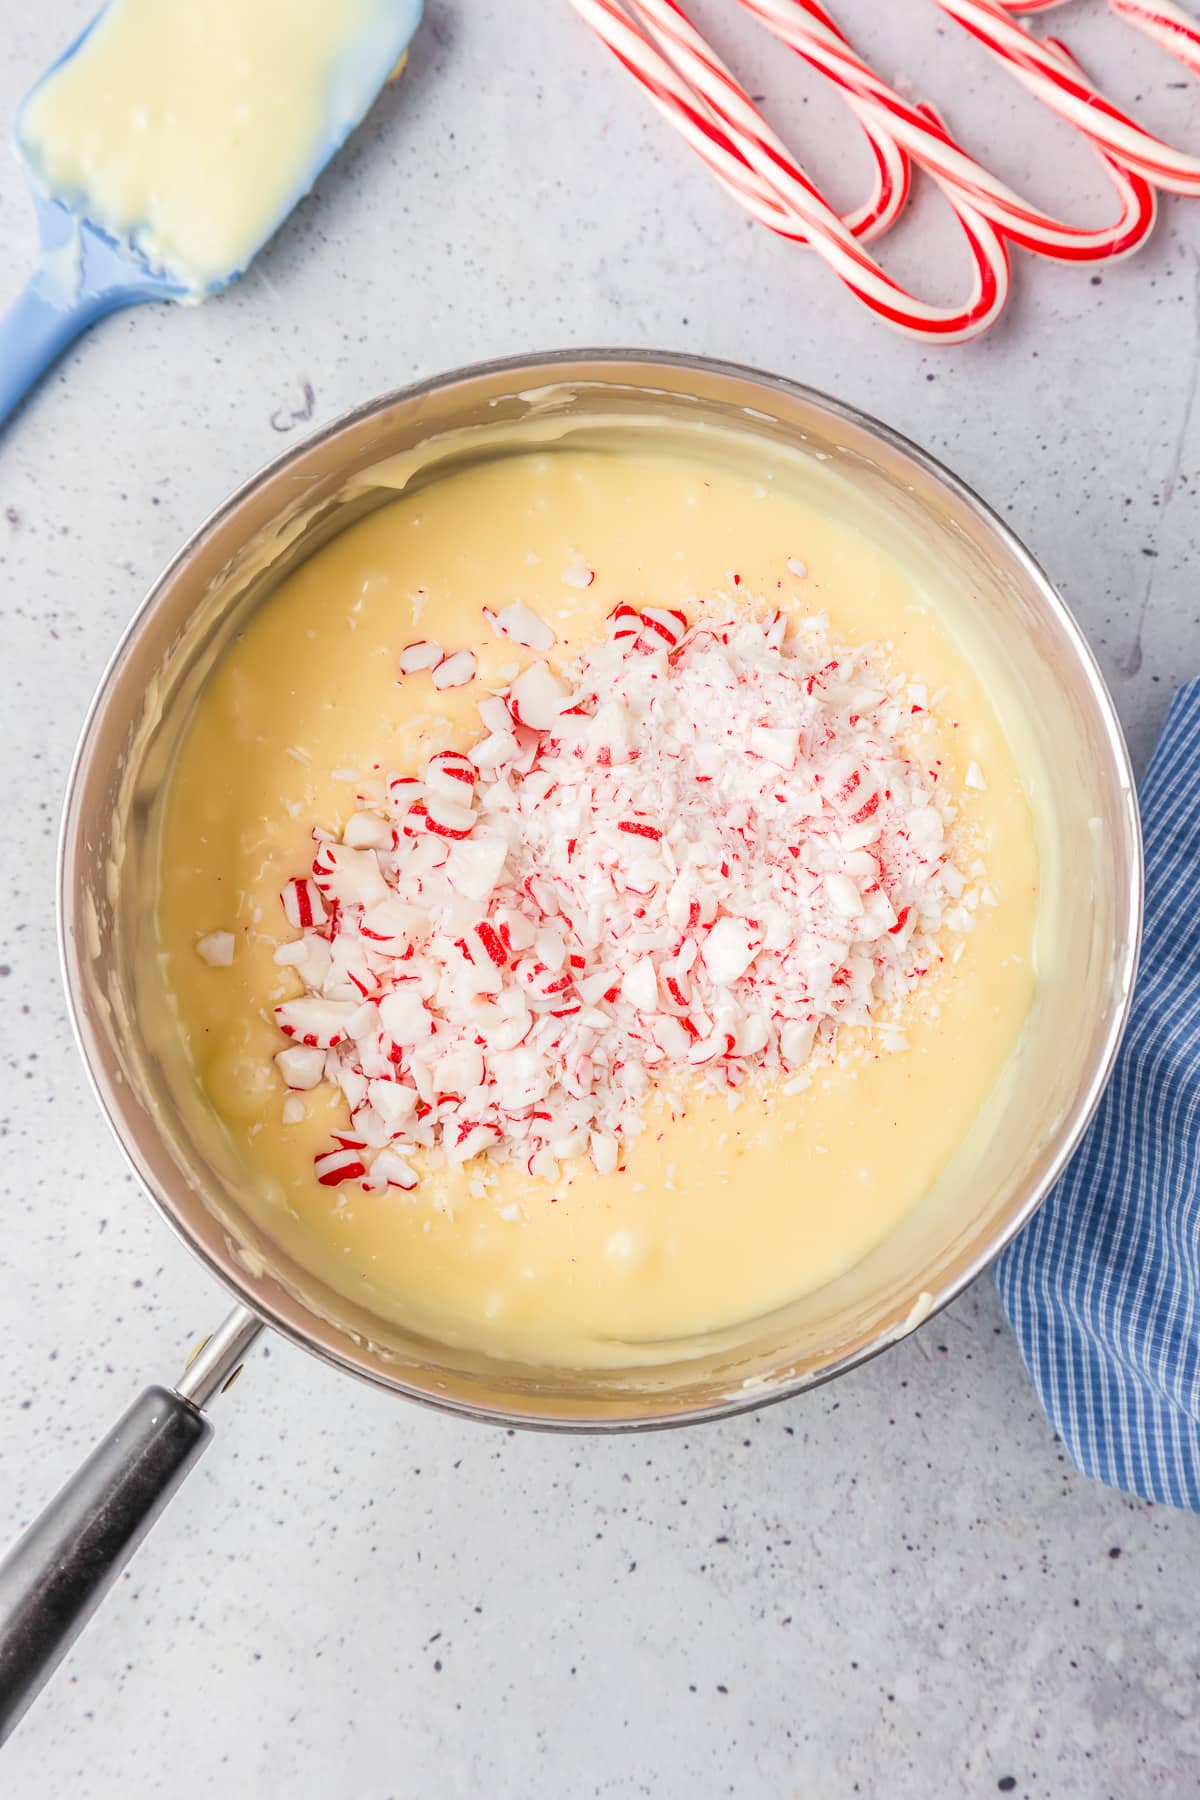 A pan full of liquid fudge with candy cane bits being mixed into it.